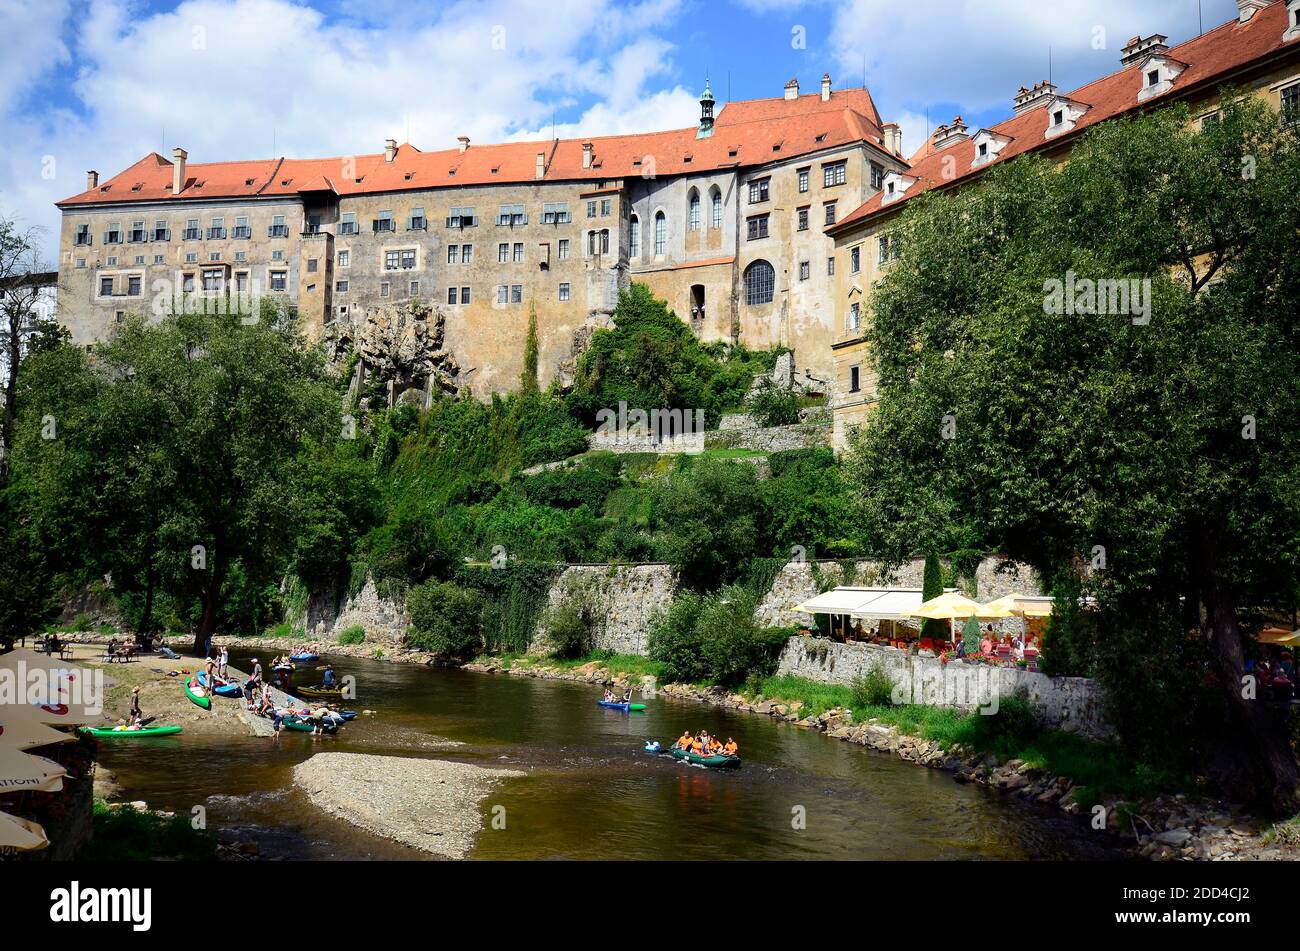 Cesky Krumlov, Czech Republic - August 11th 2013: Unidentified tourists in rubber rafts and canoes on Moldau (Vltava) river and the impressive castle Stock Photo